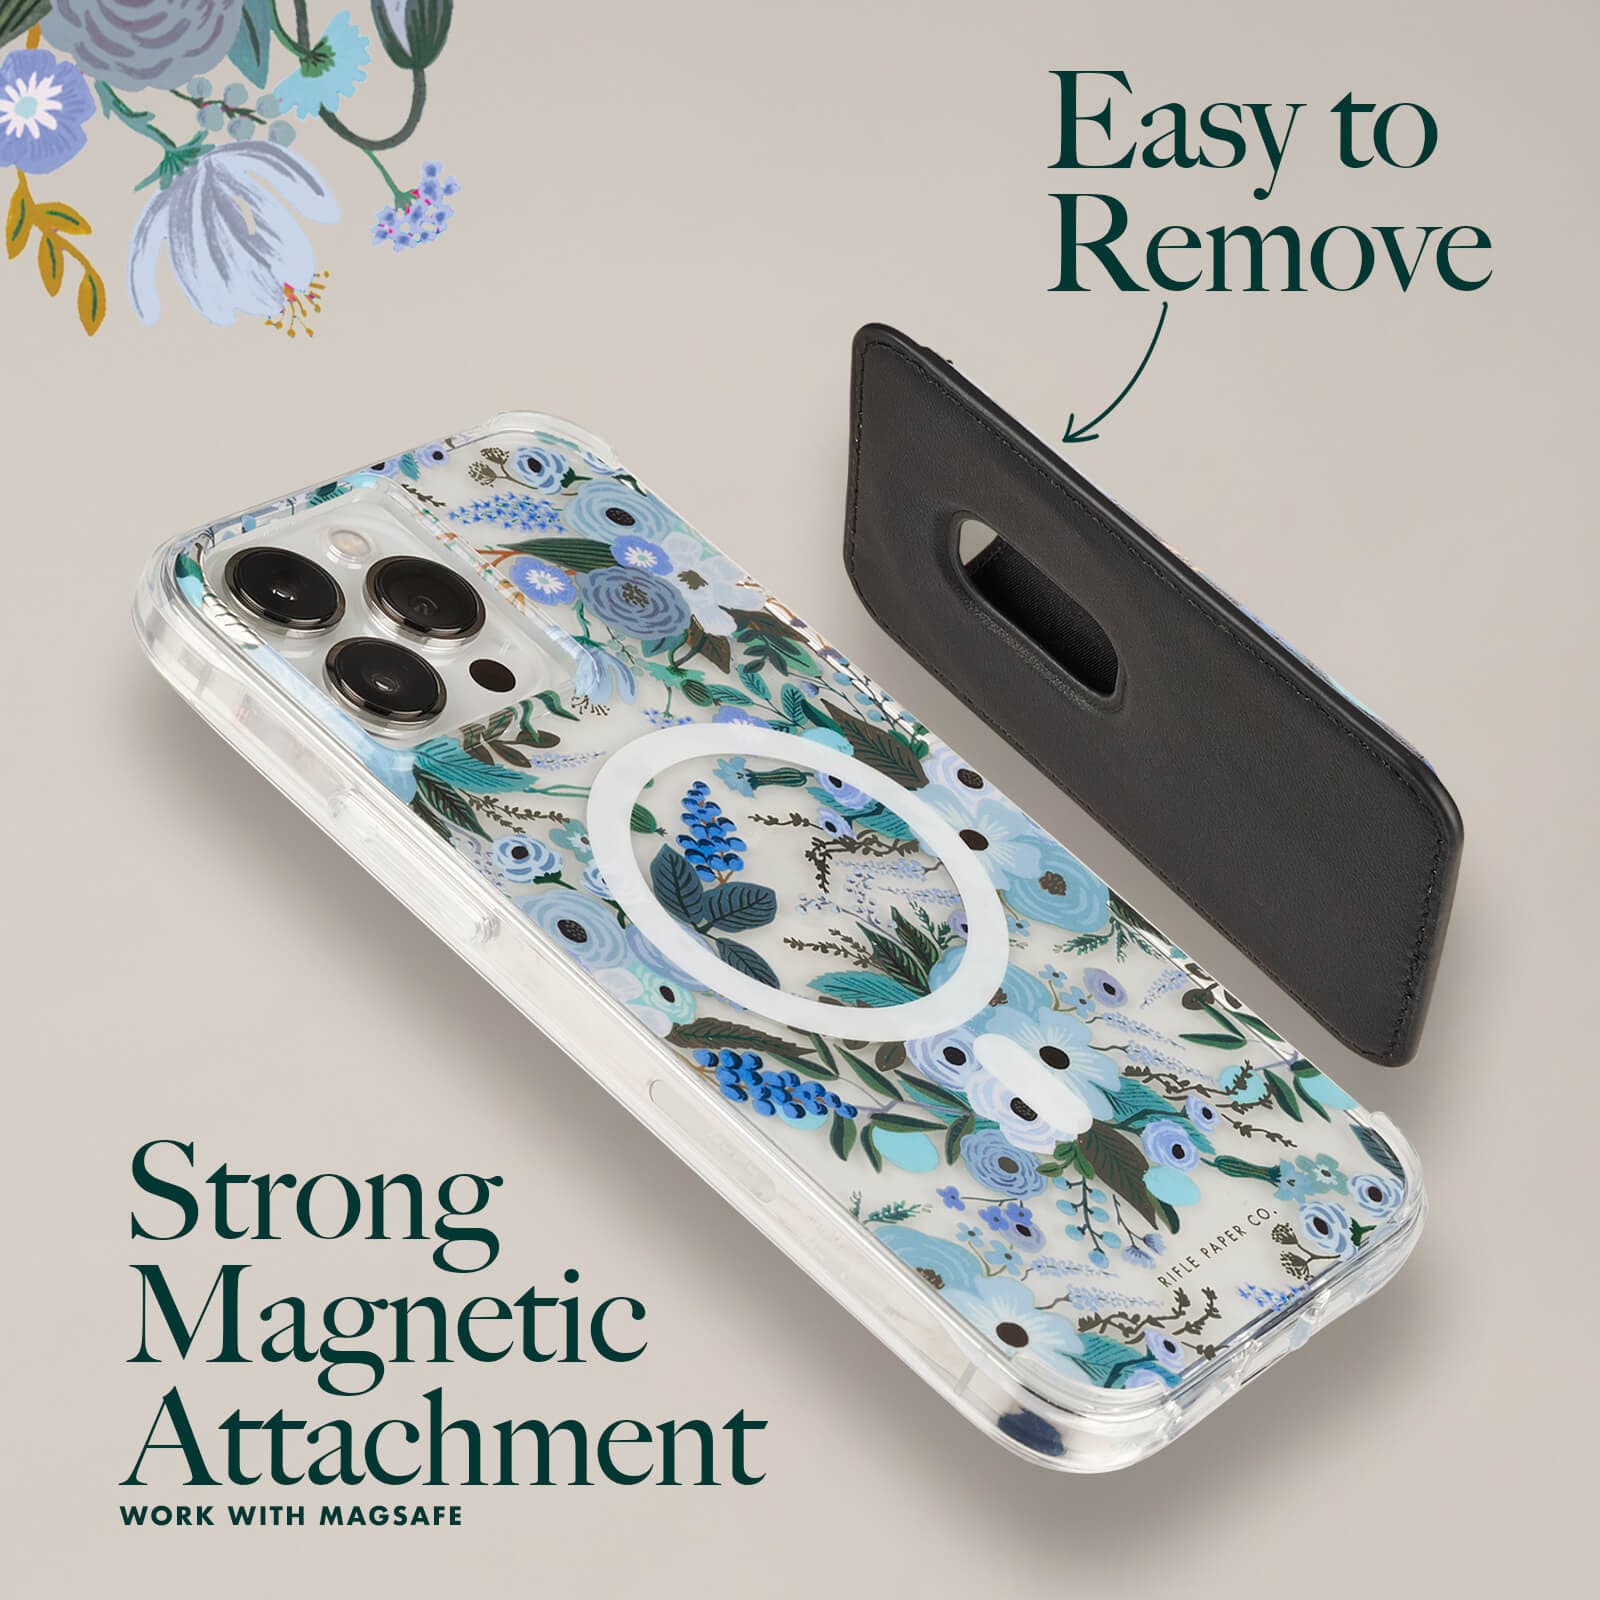 EASY TO REMOVE, STRONG MAGNETIC ATTACHMENT WORK WITH MAGSAFE. COLOR::GARDEN PARTY BLUE